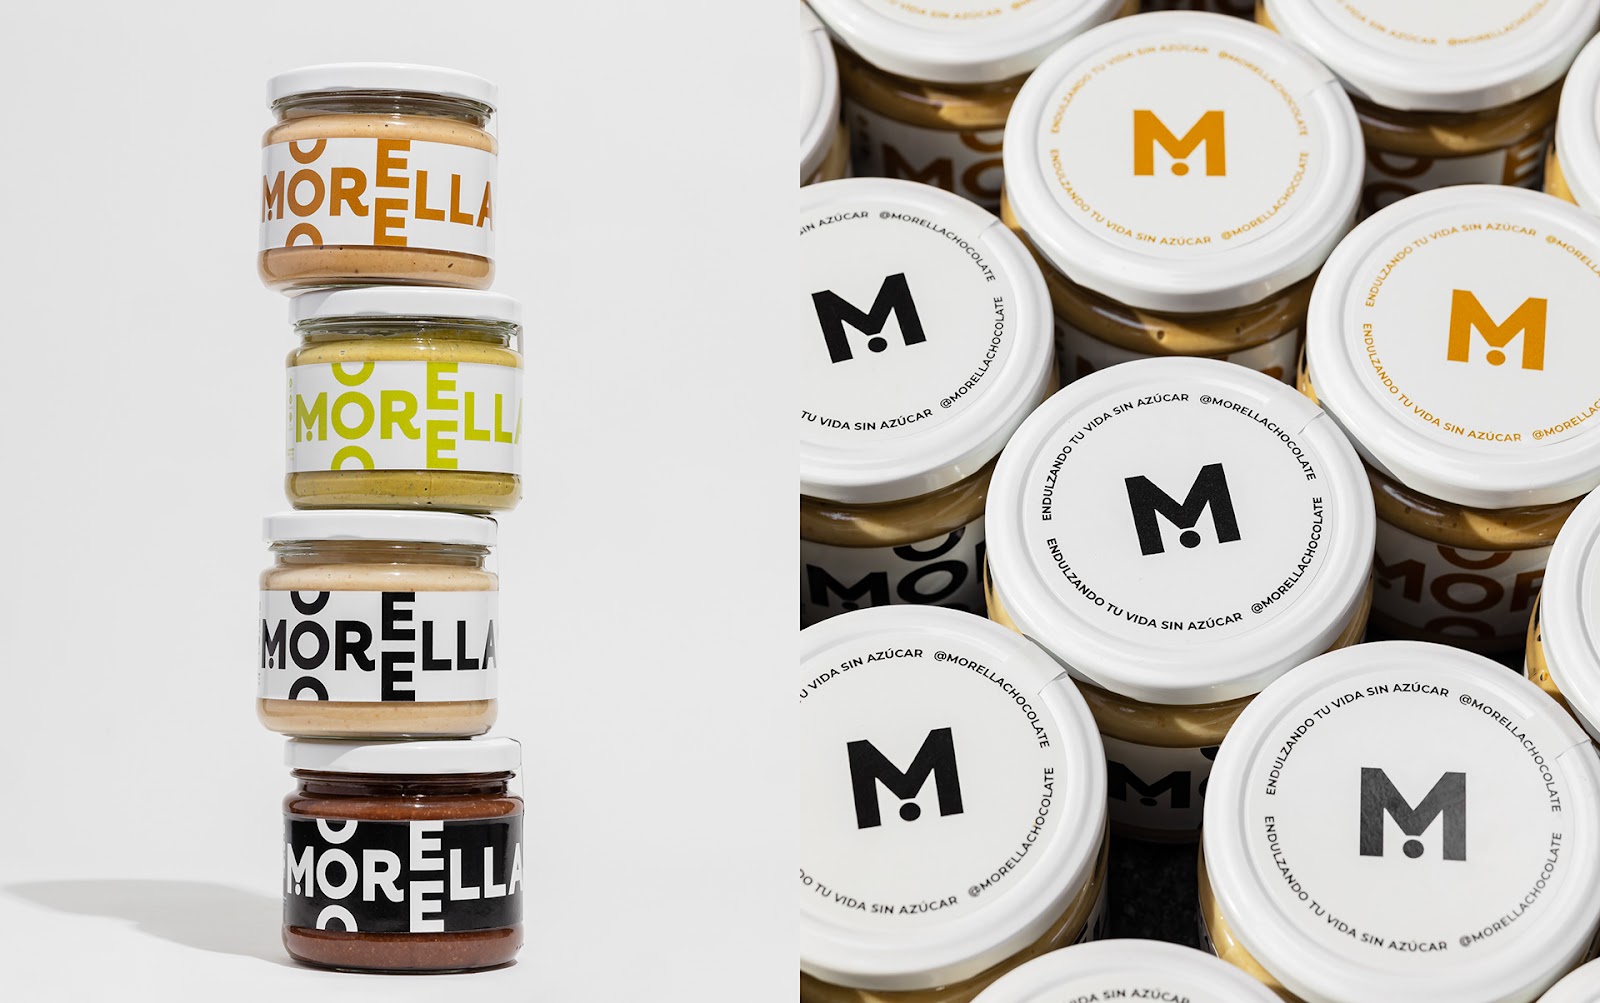 Packaging design and brand identity artifacts